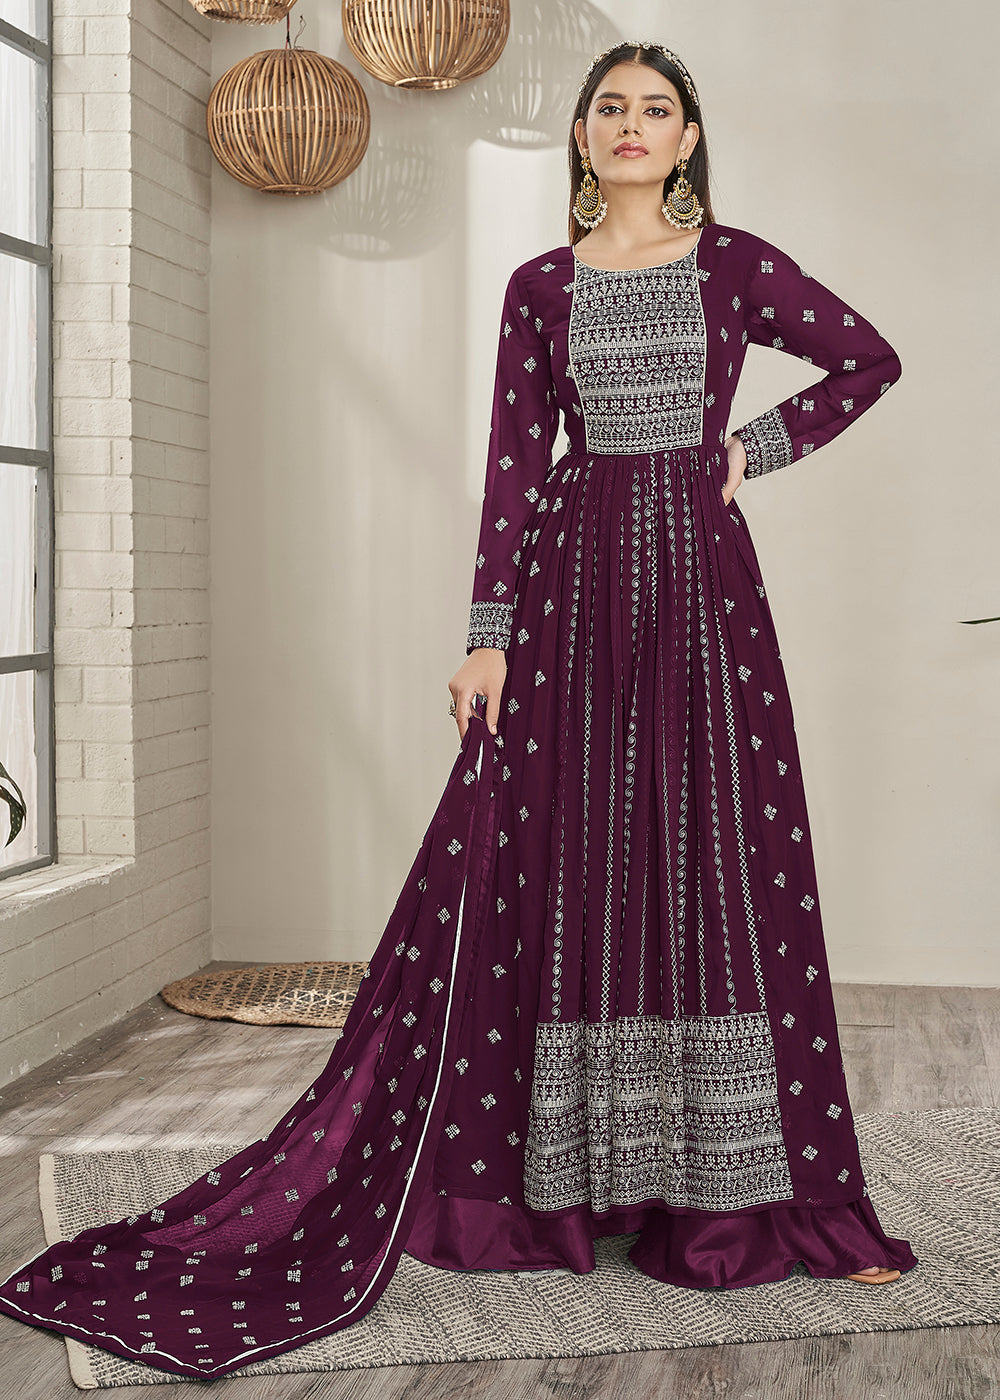 Buy Now Glamourous Party Style Violet Long Top Style Palazzo Suit Online in USA, UK, Canada & Worldwide at Empress Clothing. 